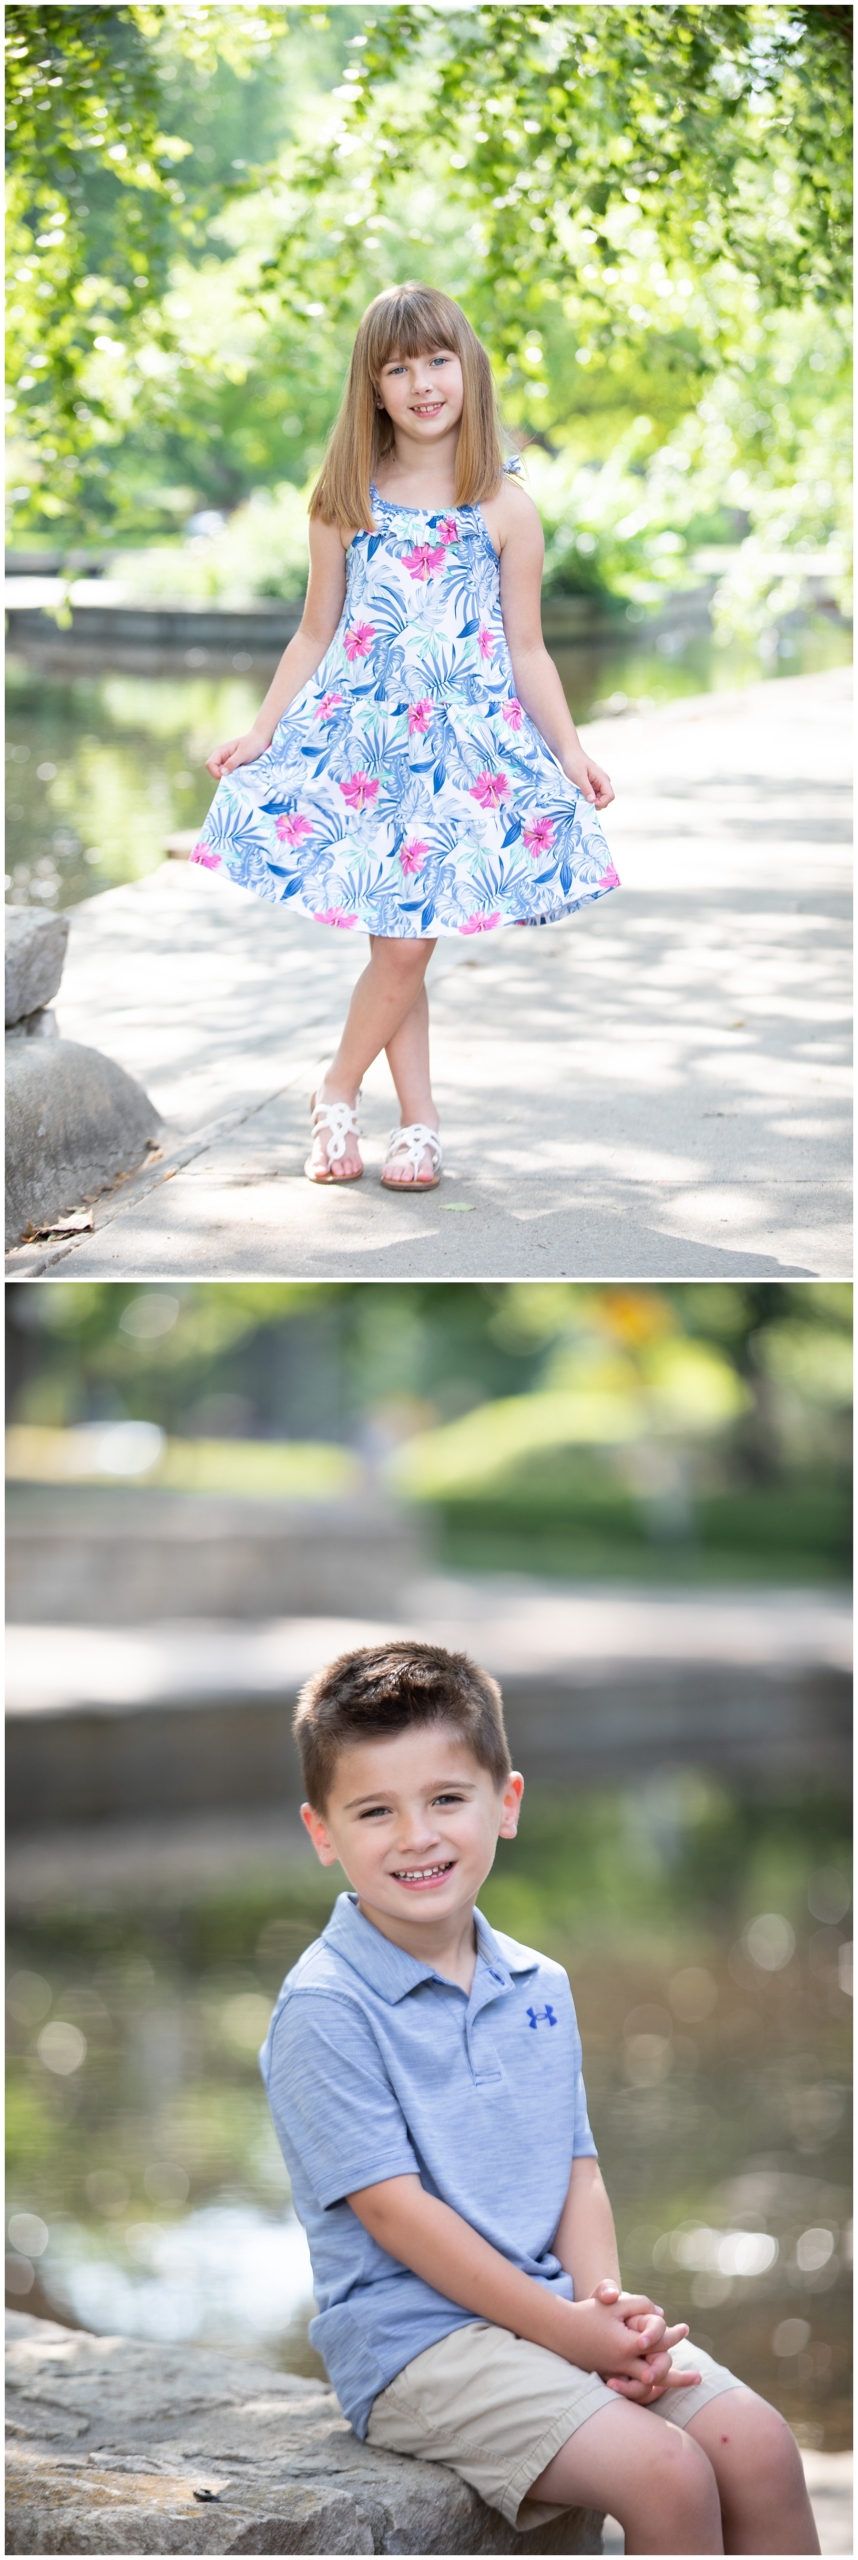 girl showing off dress and brother posing for photos at loose park